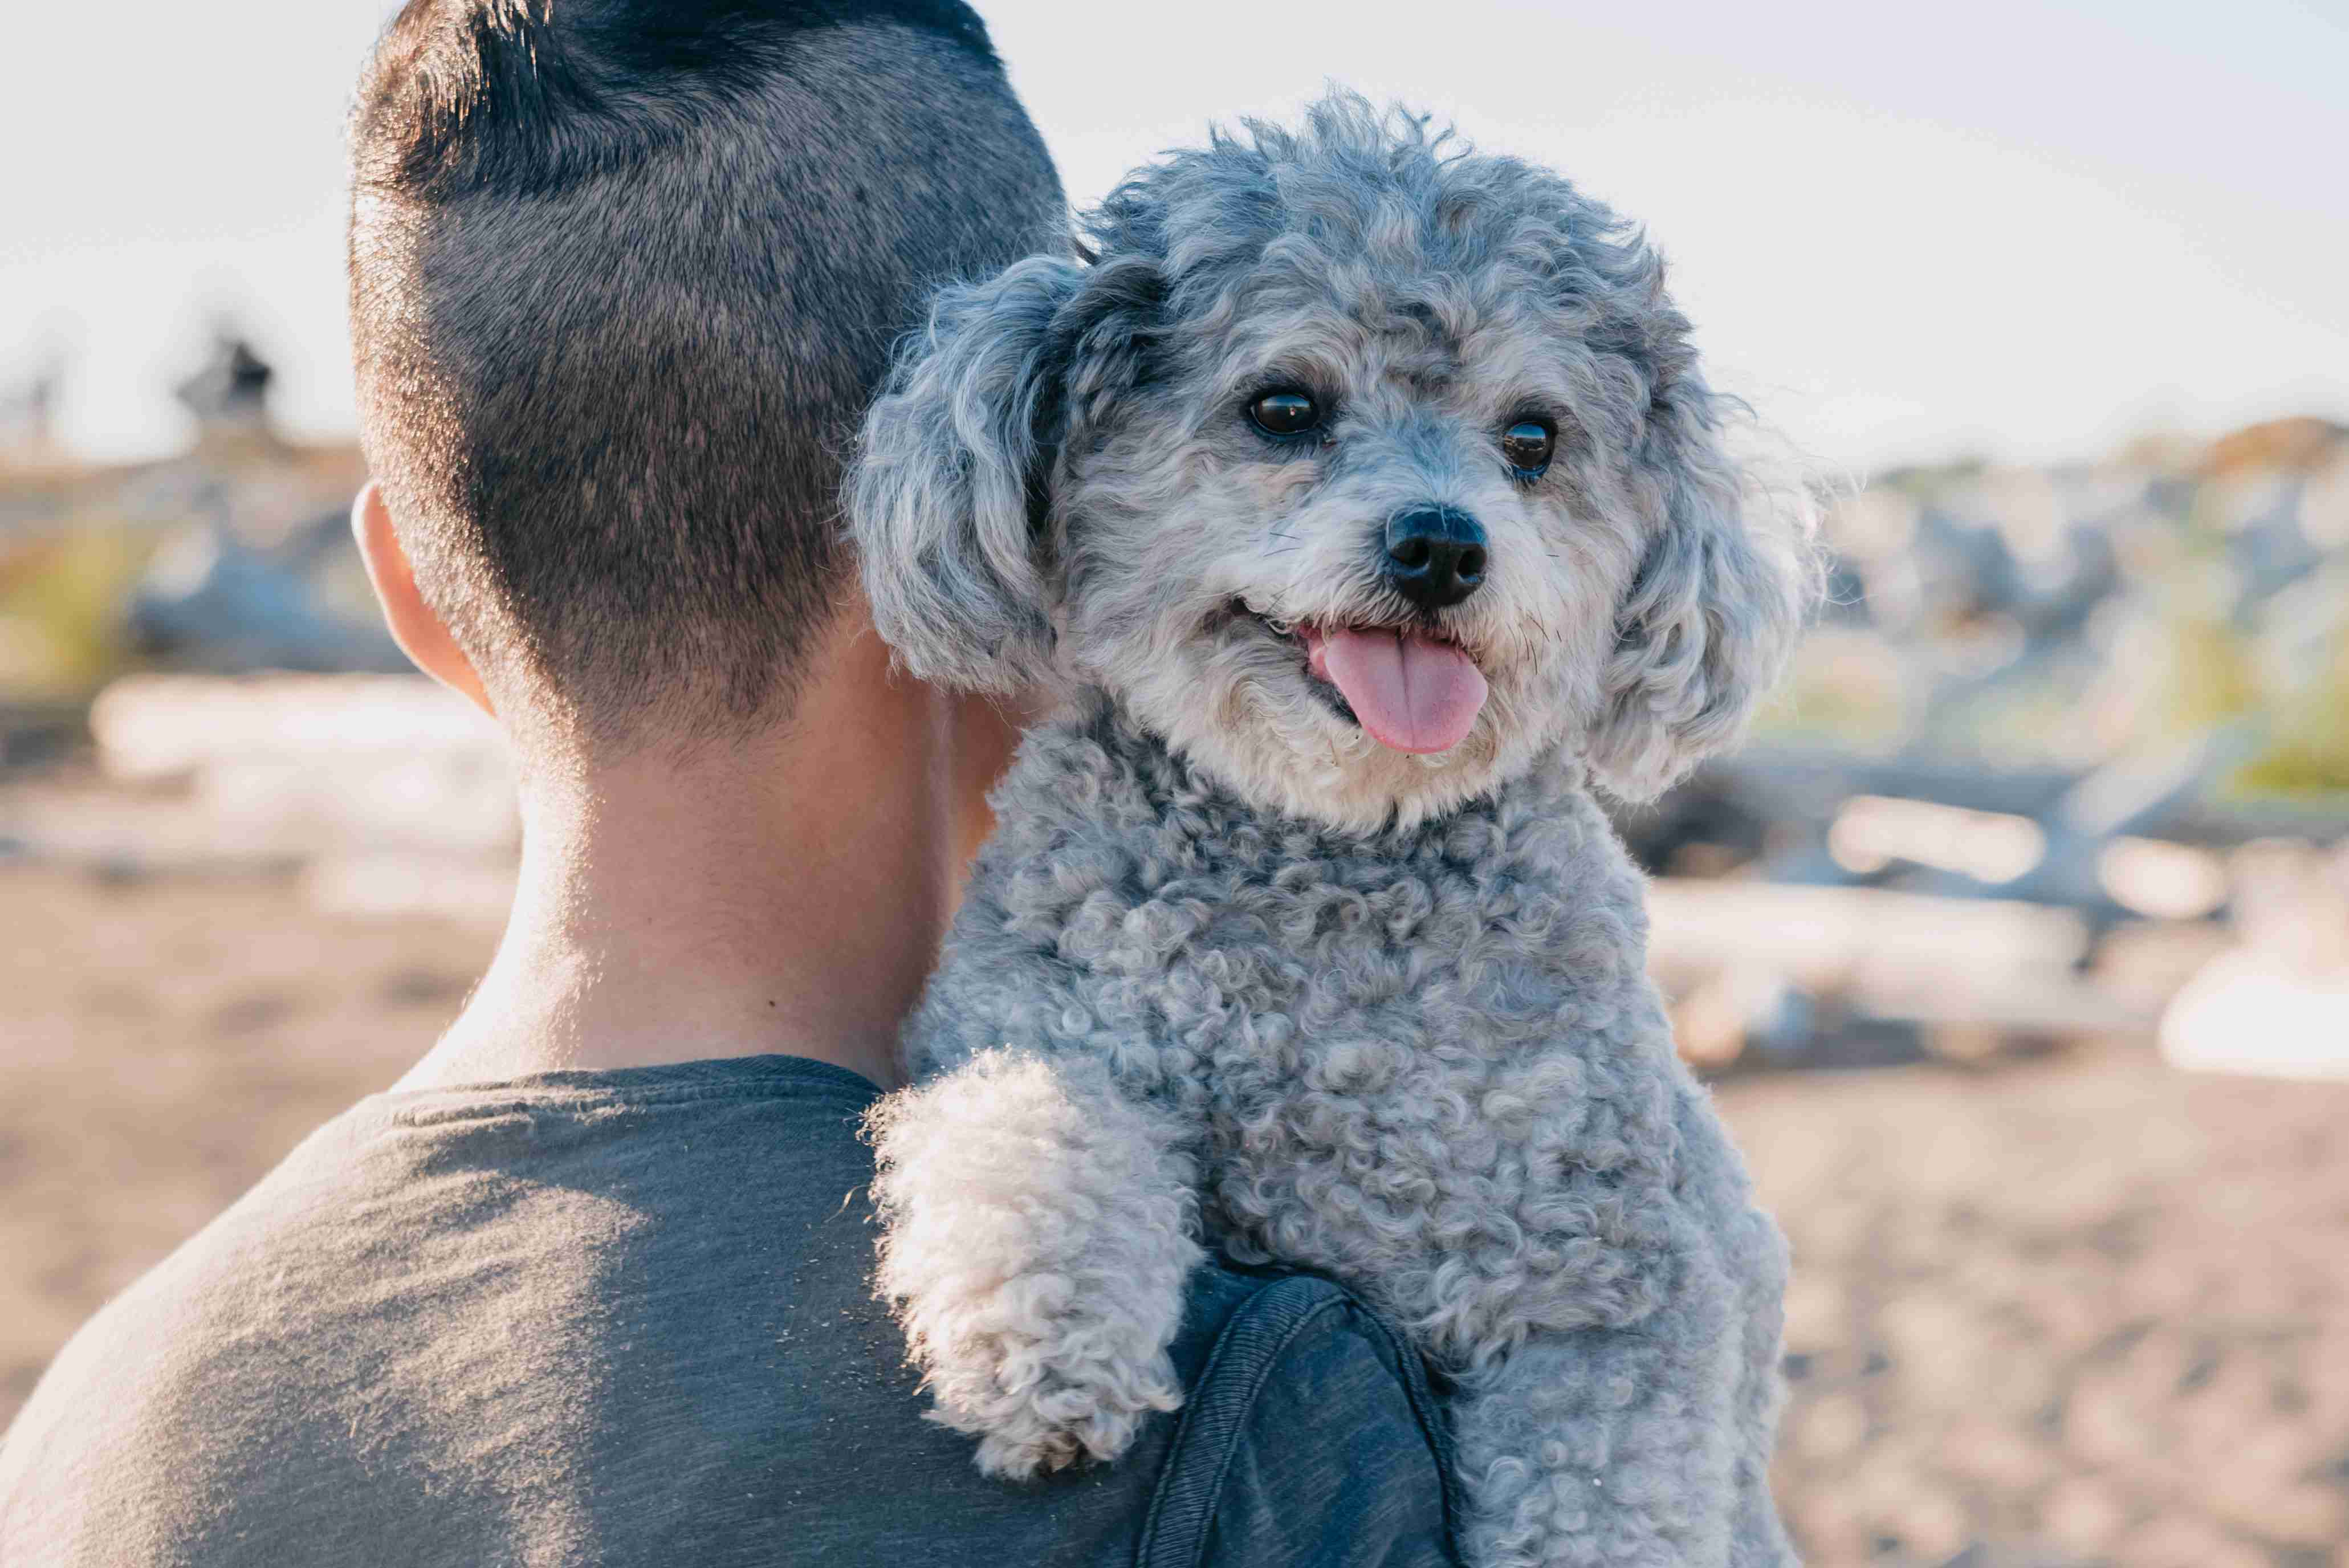 How do you introduce your Poodle puppy to new people and visitors?